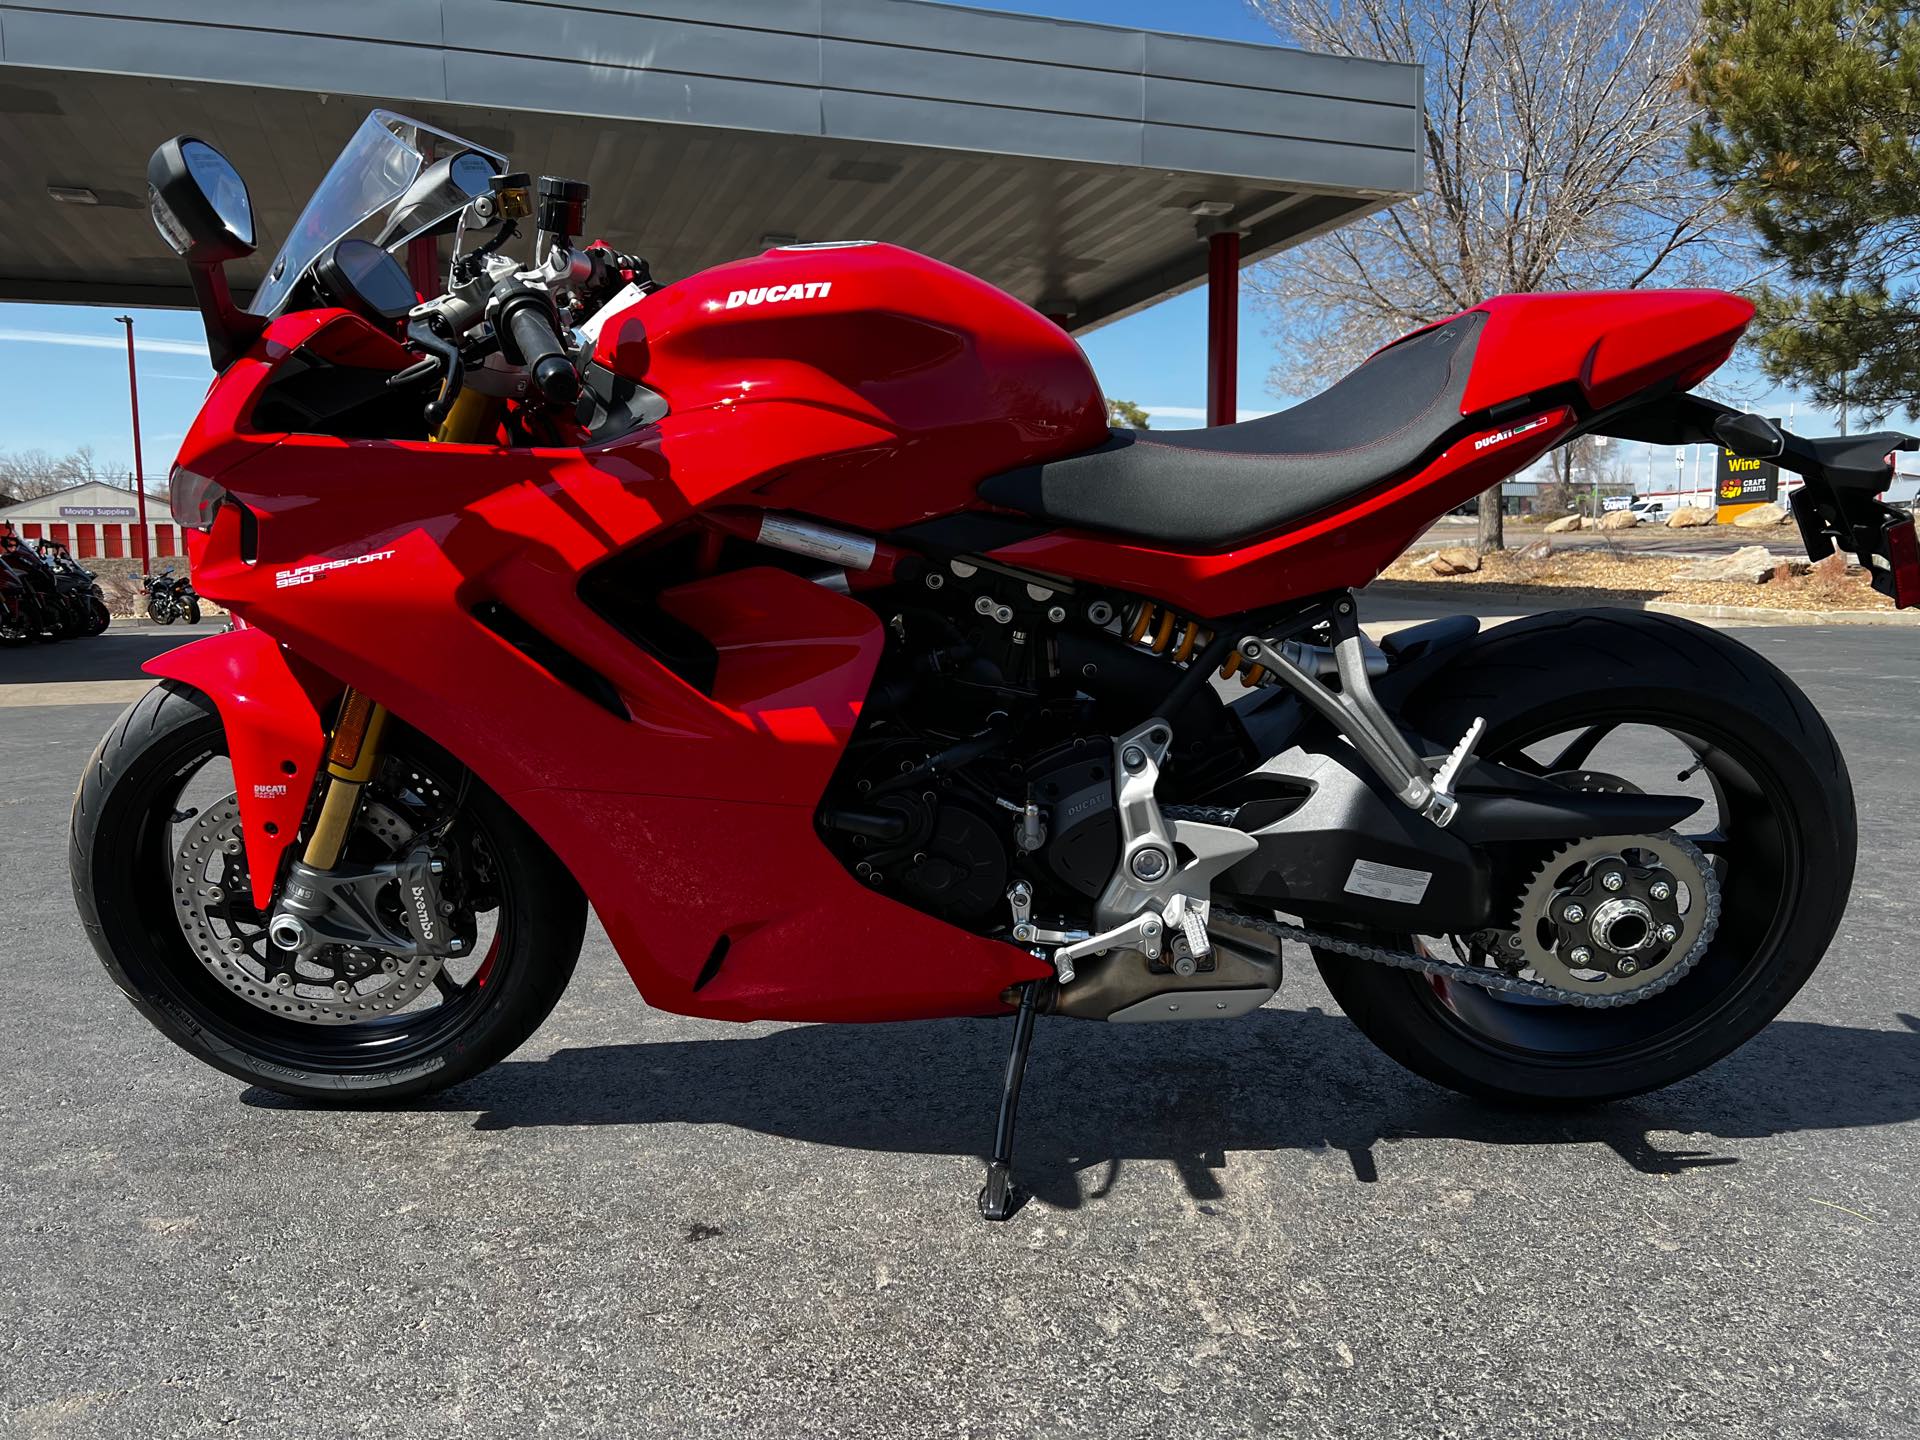 2022 Ducati SuperSport 950 S at Aces Motorcycles - Fort Collins